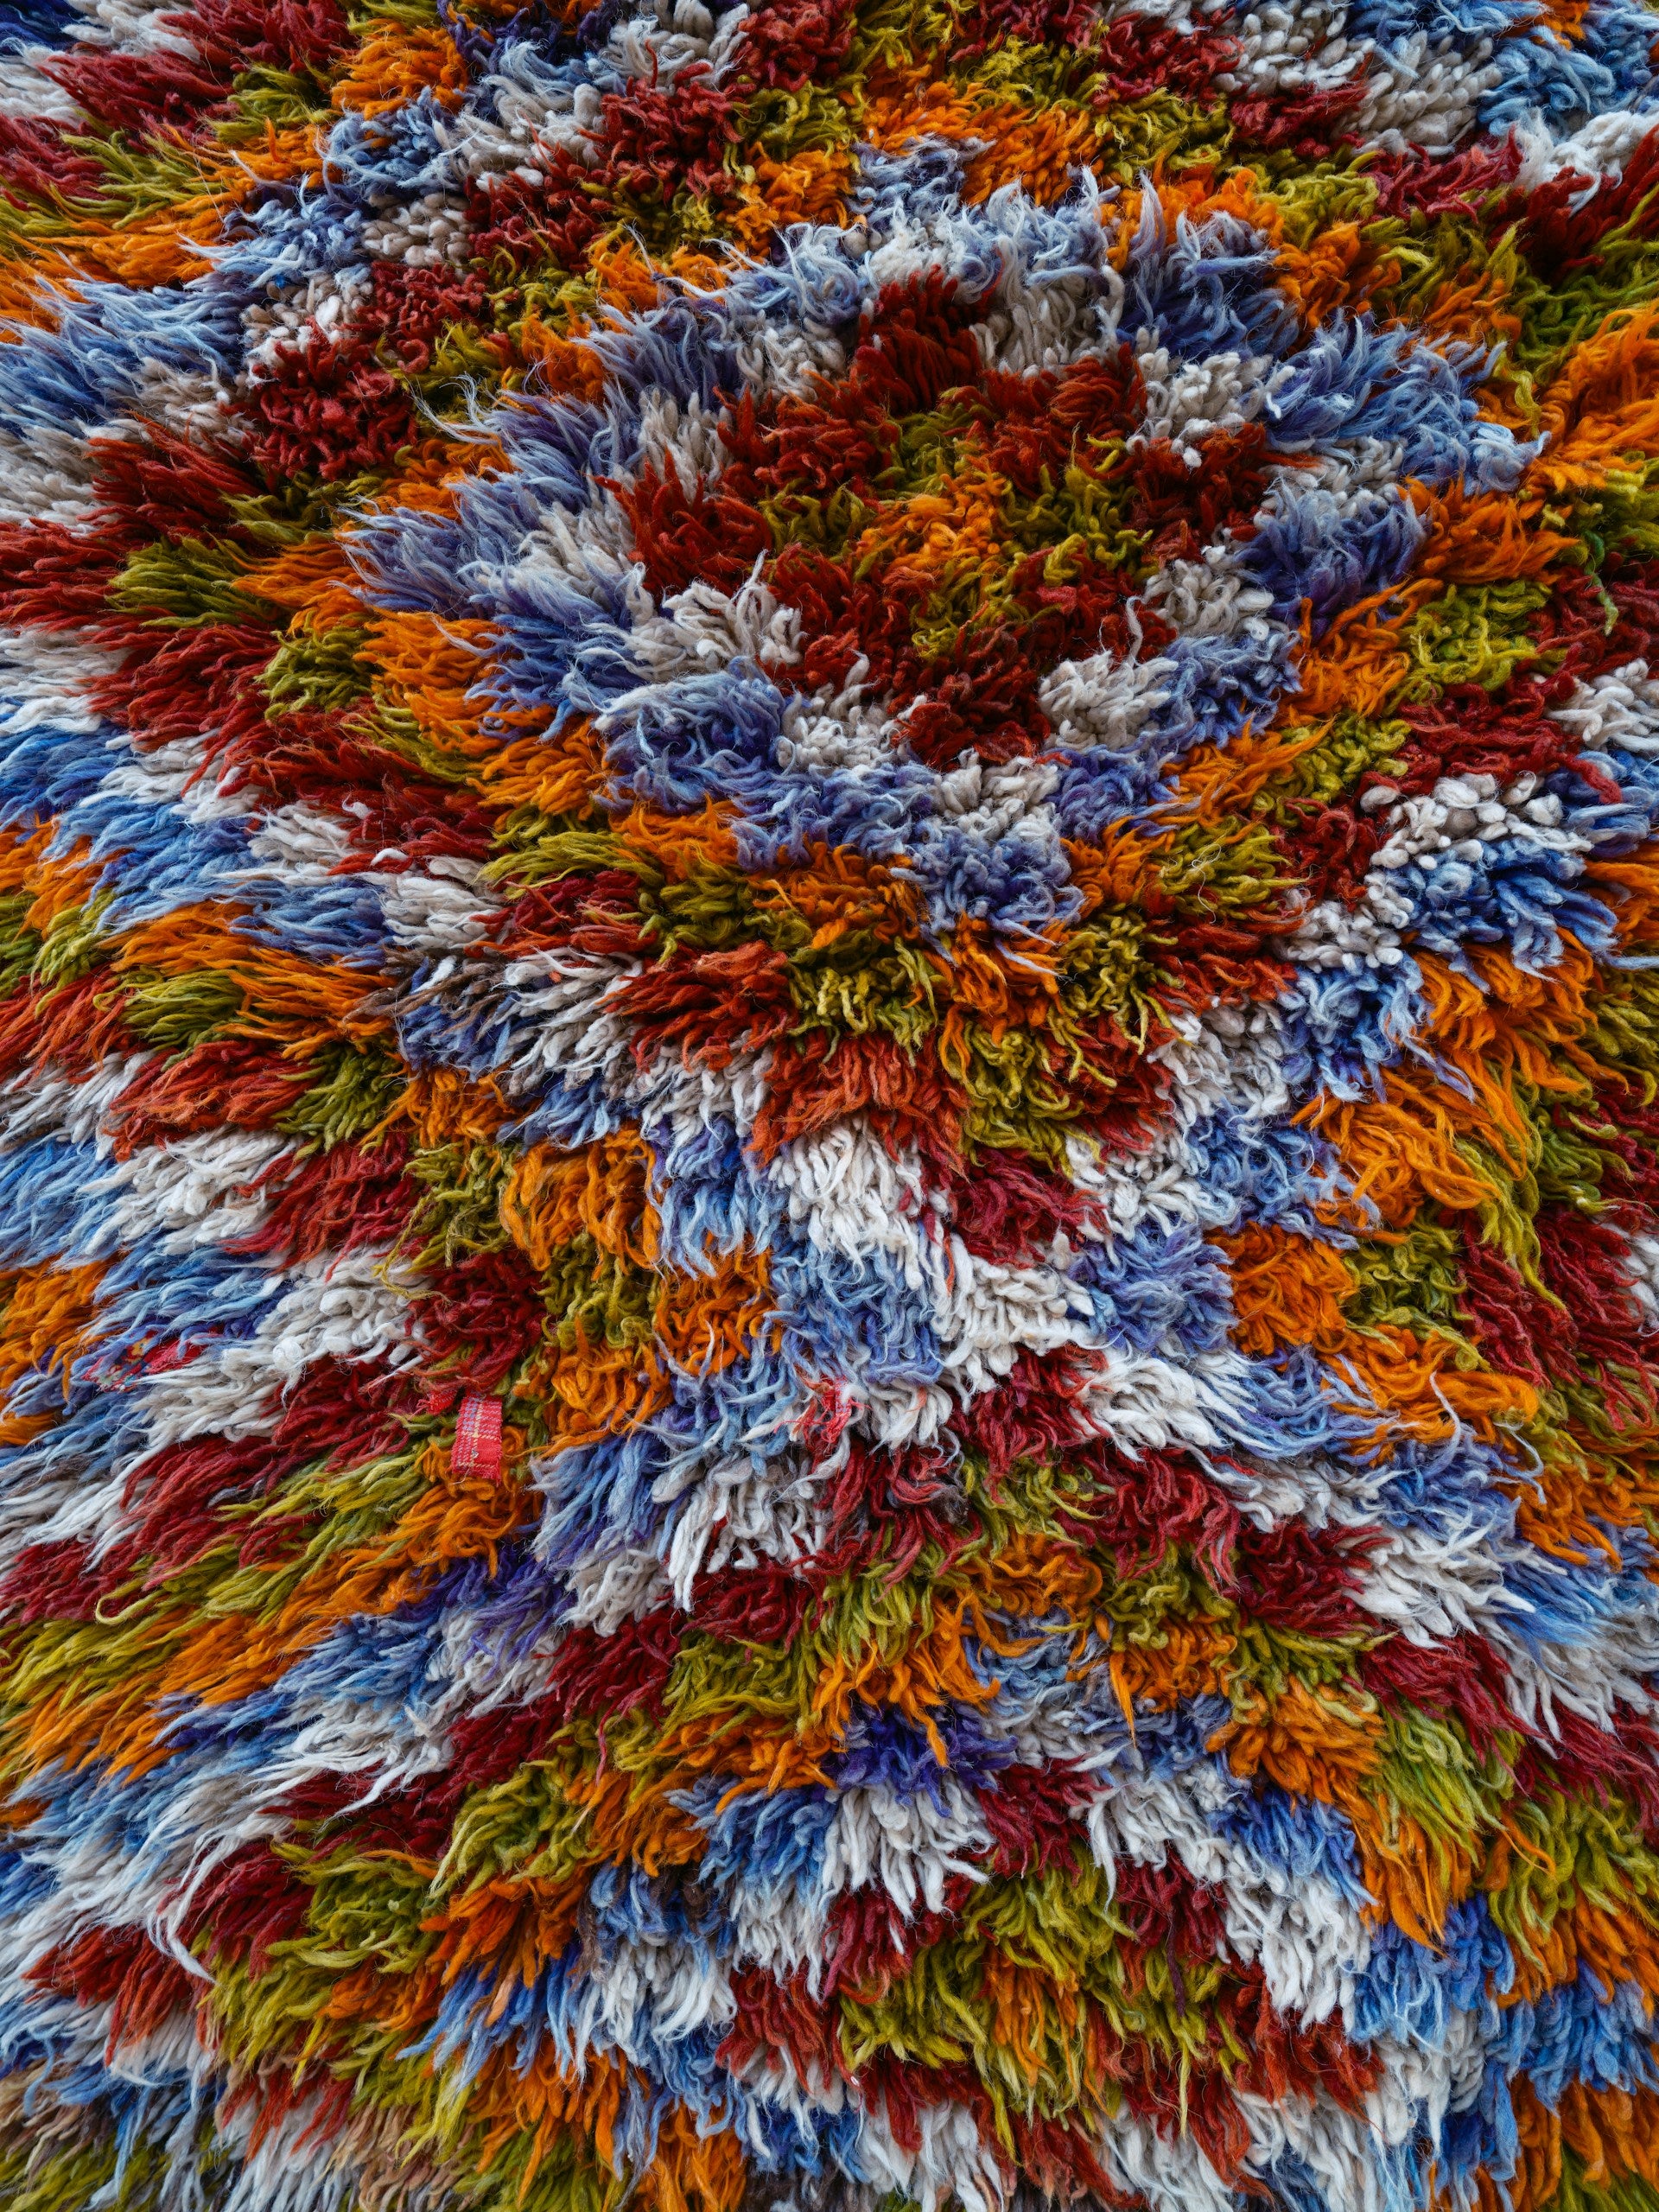 A close up of a colorful shaggy rug.